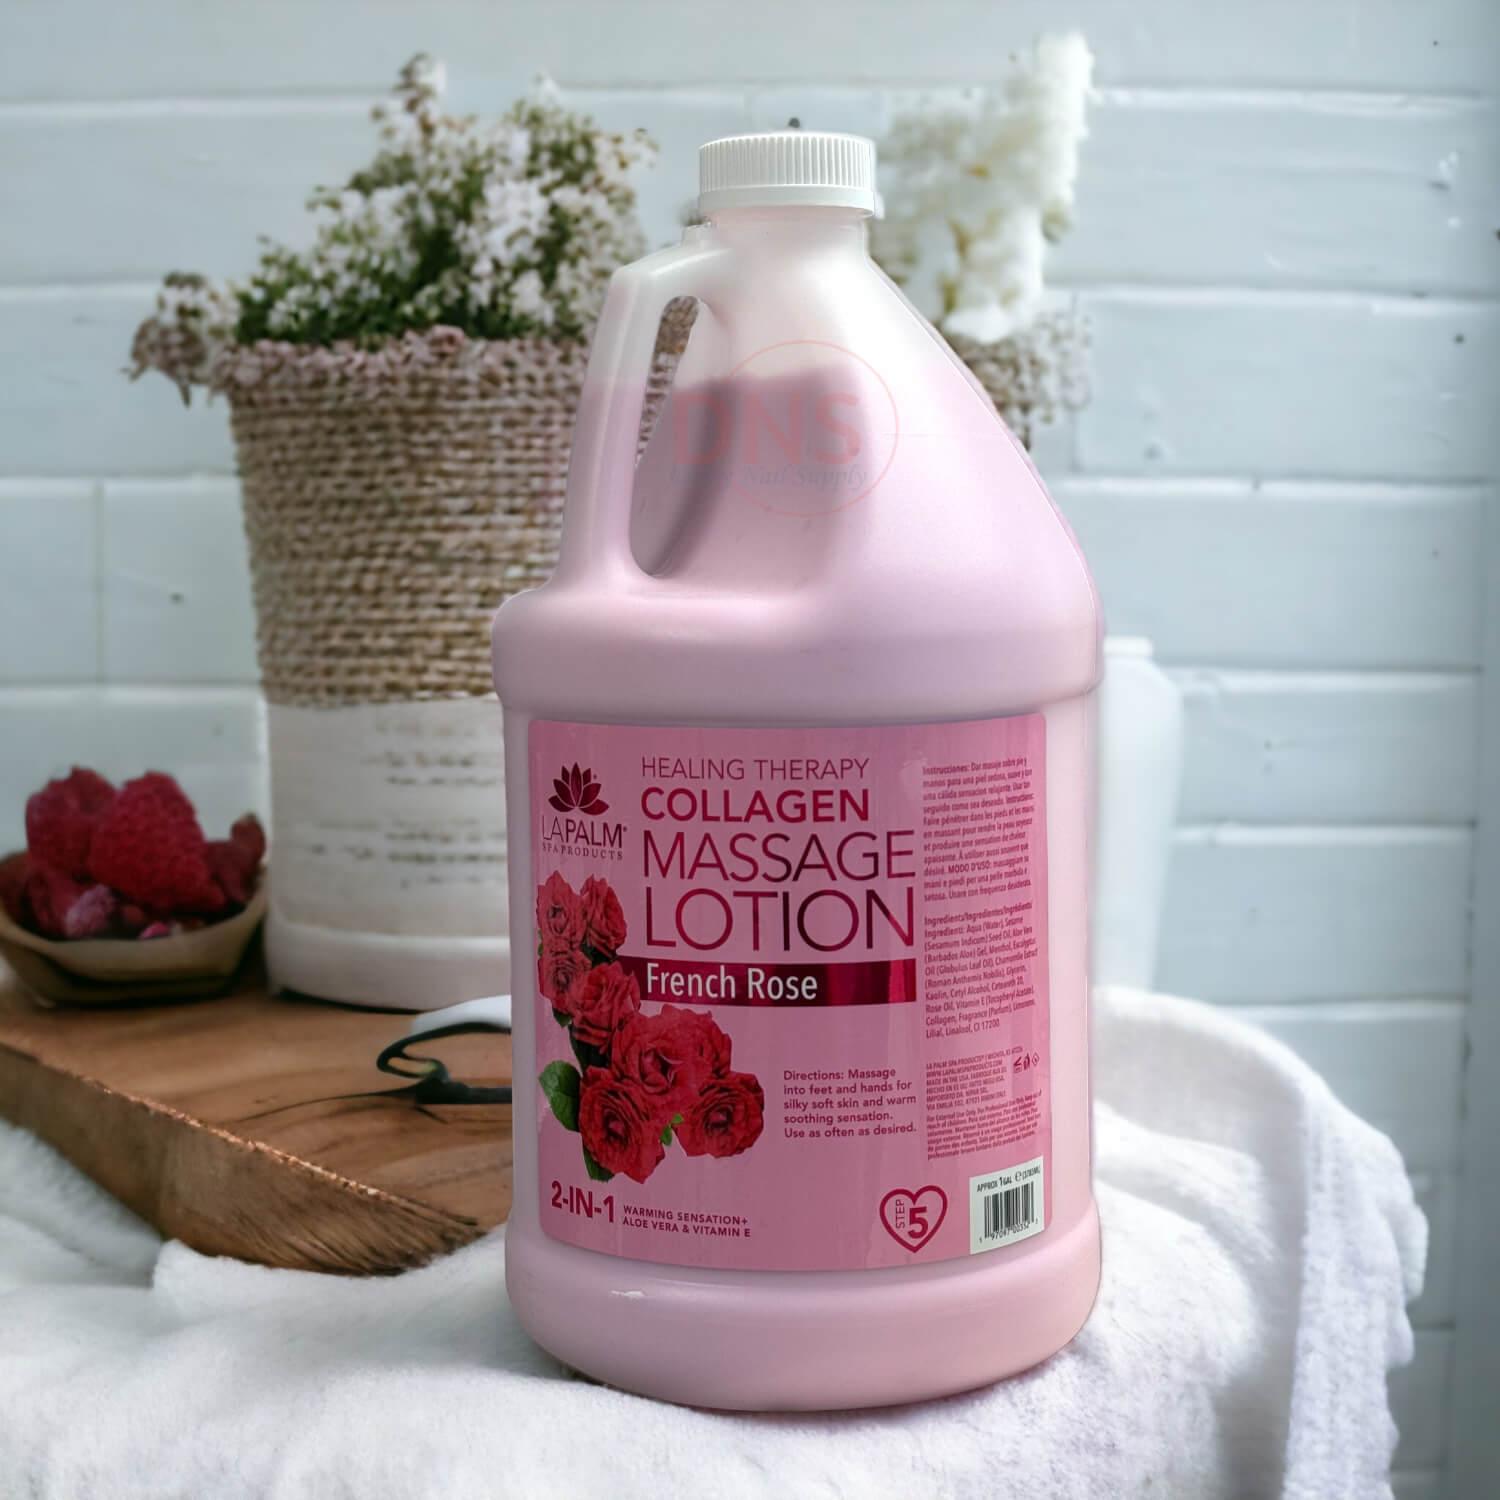 Lapalm Spa Healing Therapy Massage Lotion 1 Gallon - French Rose